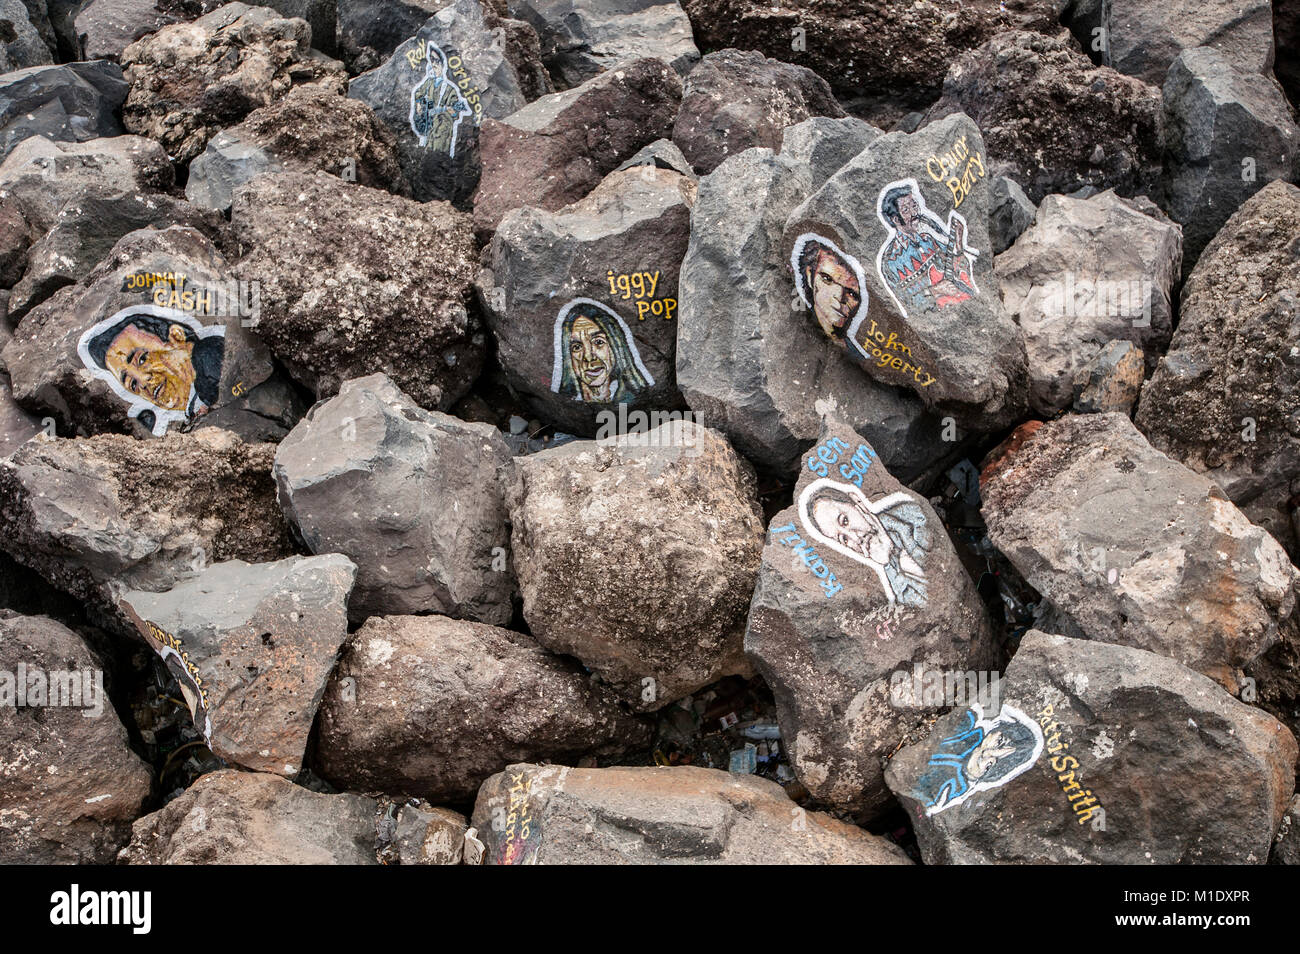 Portraits of famous musicians on rocks on coast in front of the Auditorio de Tenerife Concert Hall designed by Spanish architect Santiago Calatrava. Stock Photo